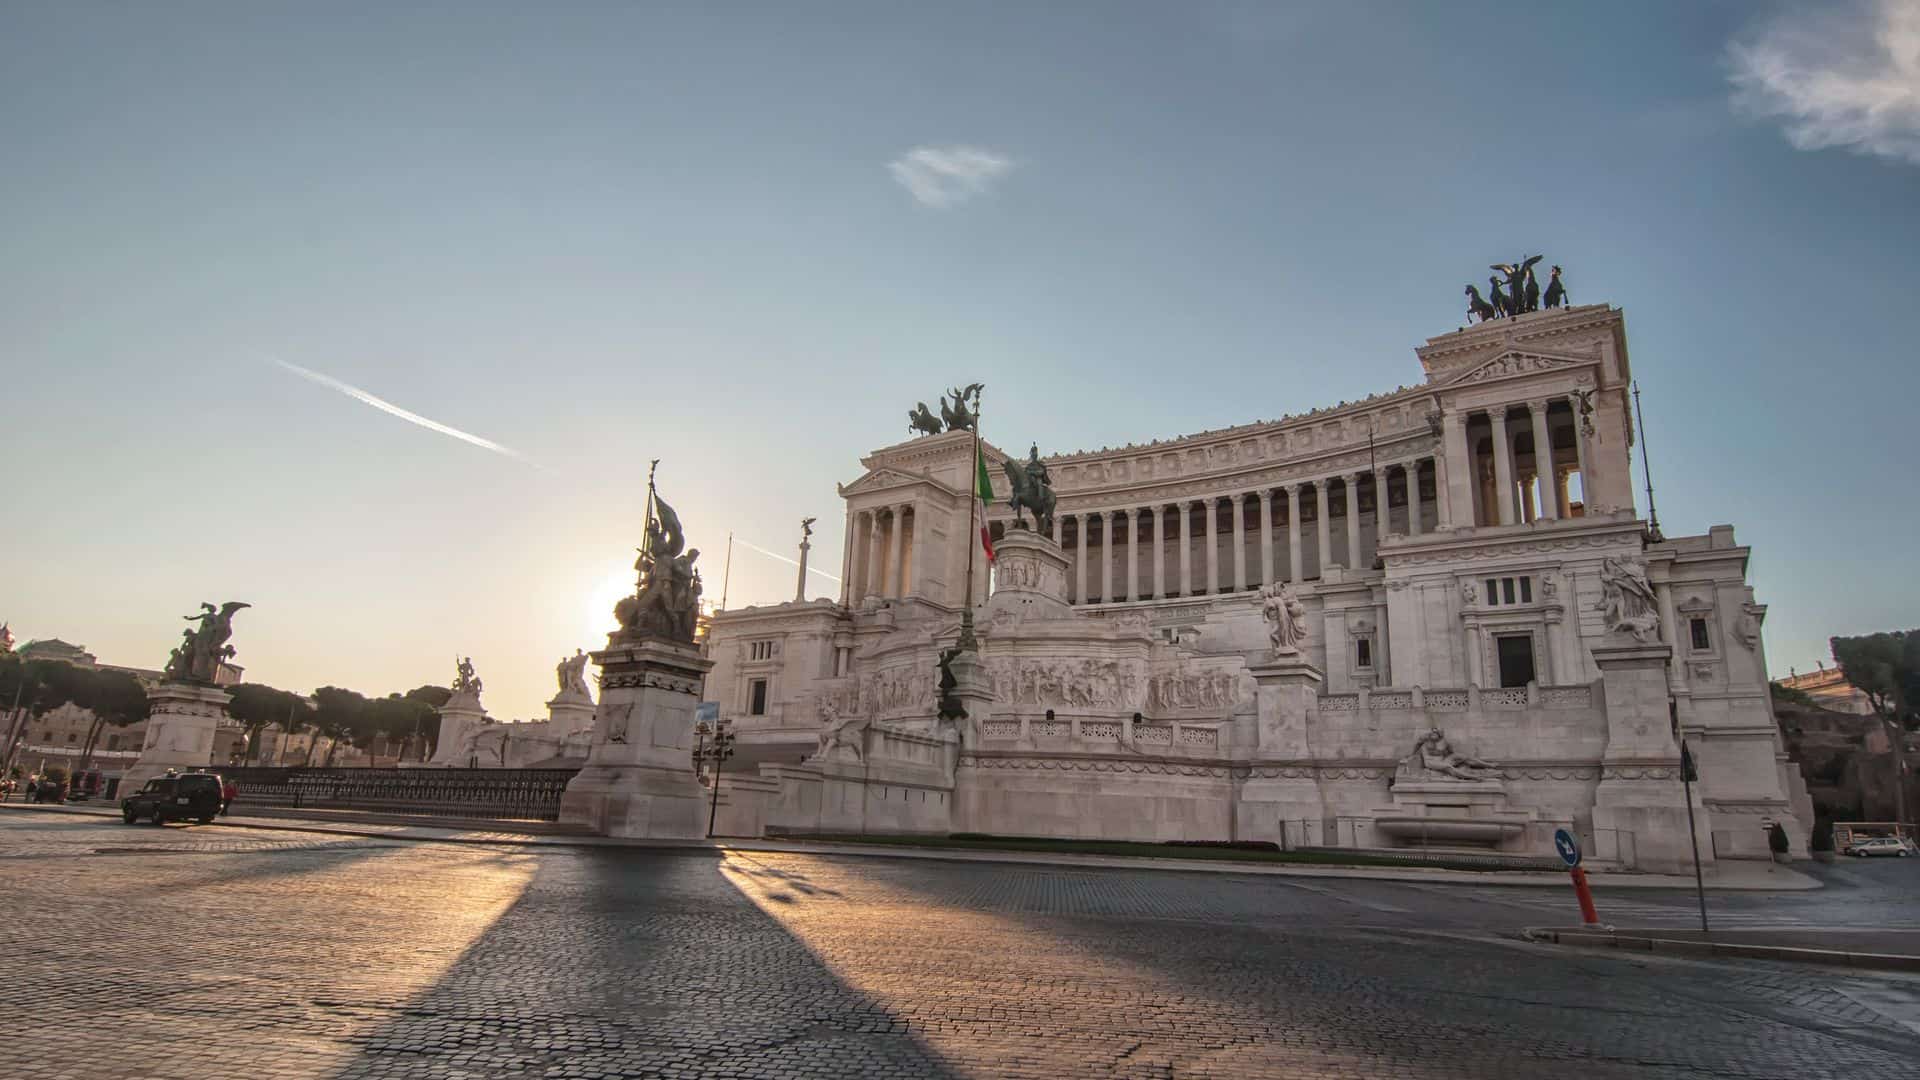 View of the Victor Emmanuel II Monument at Piazza Venezia, Rome